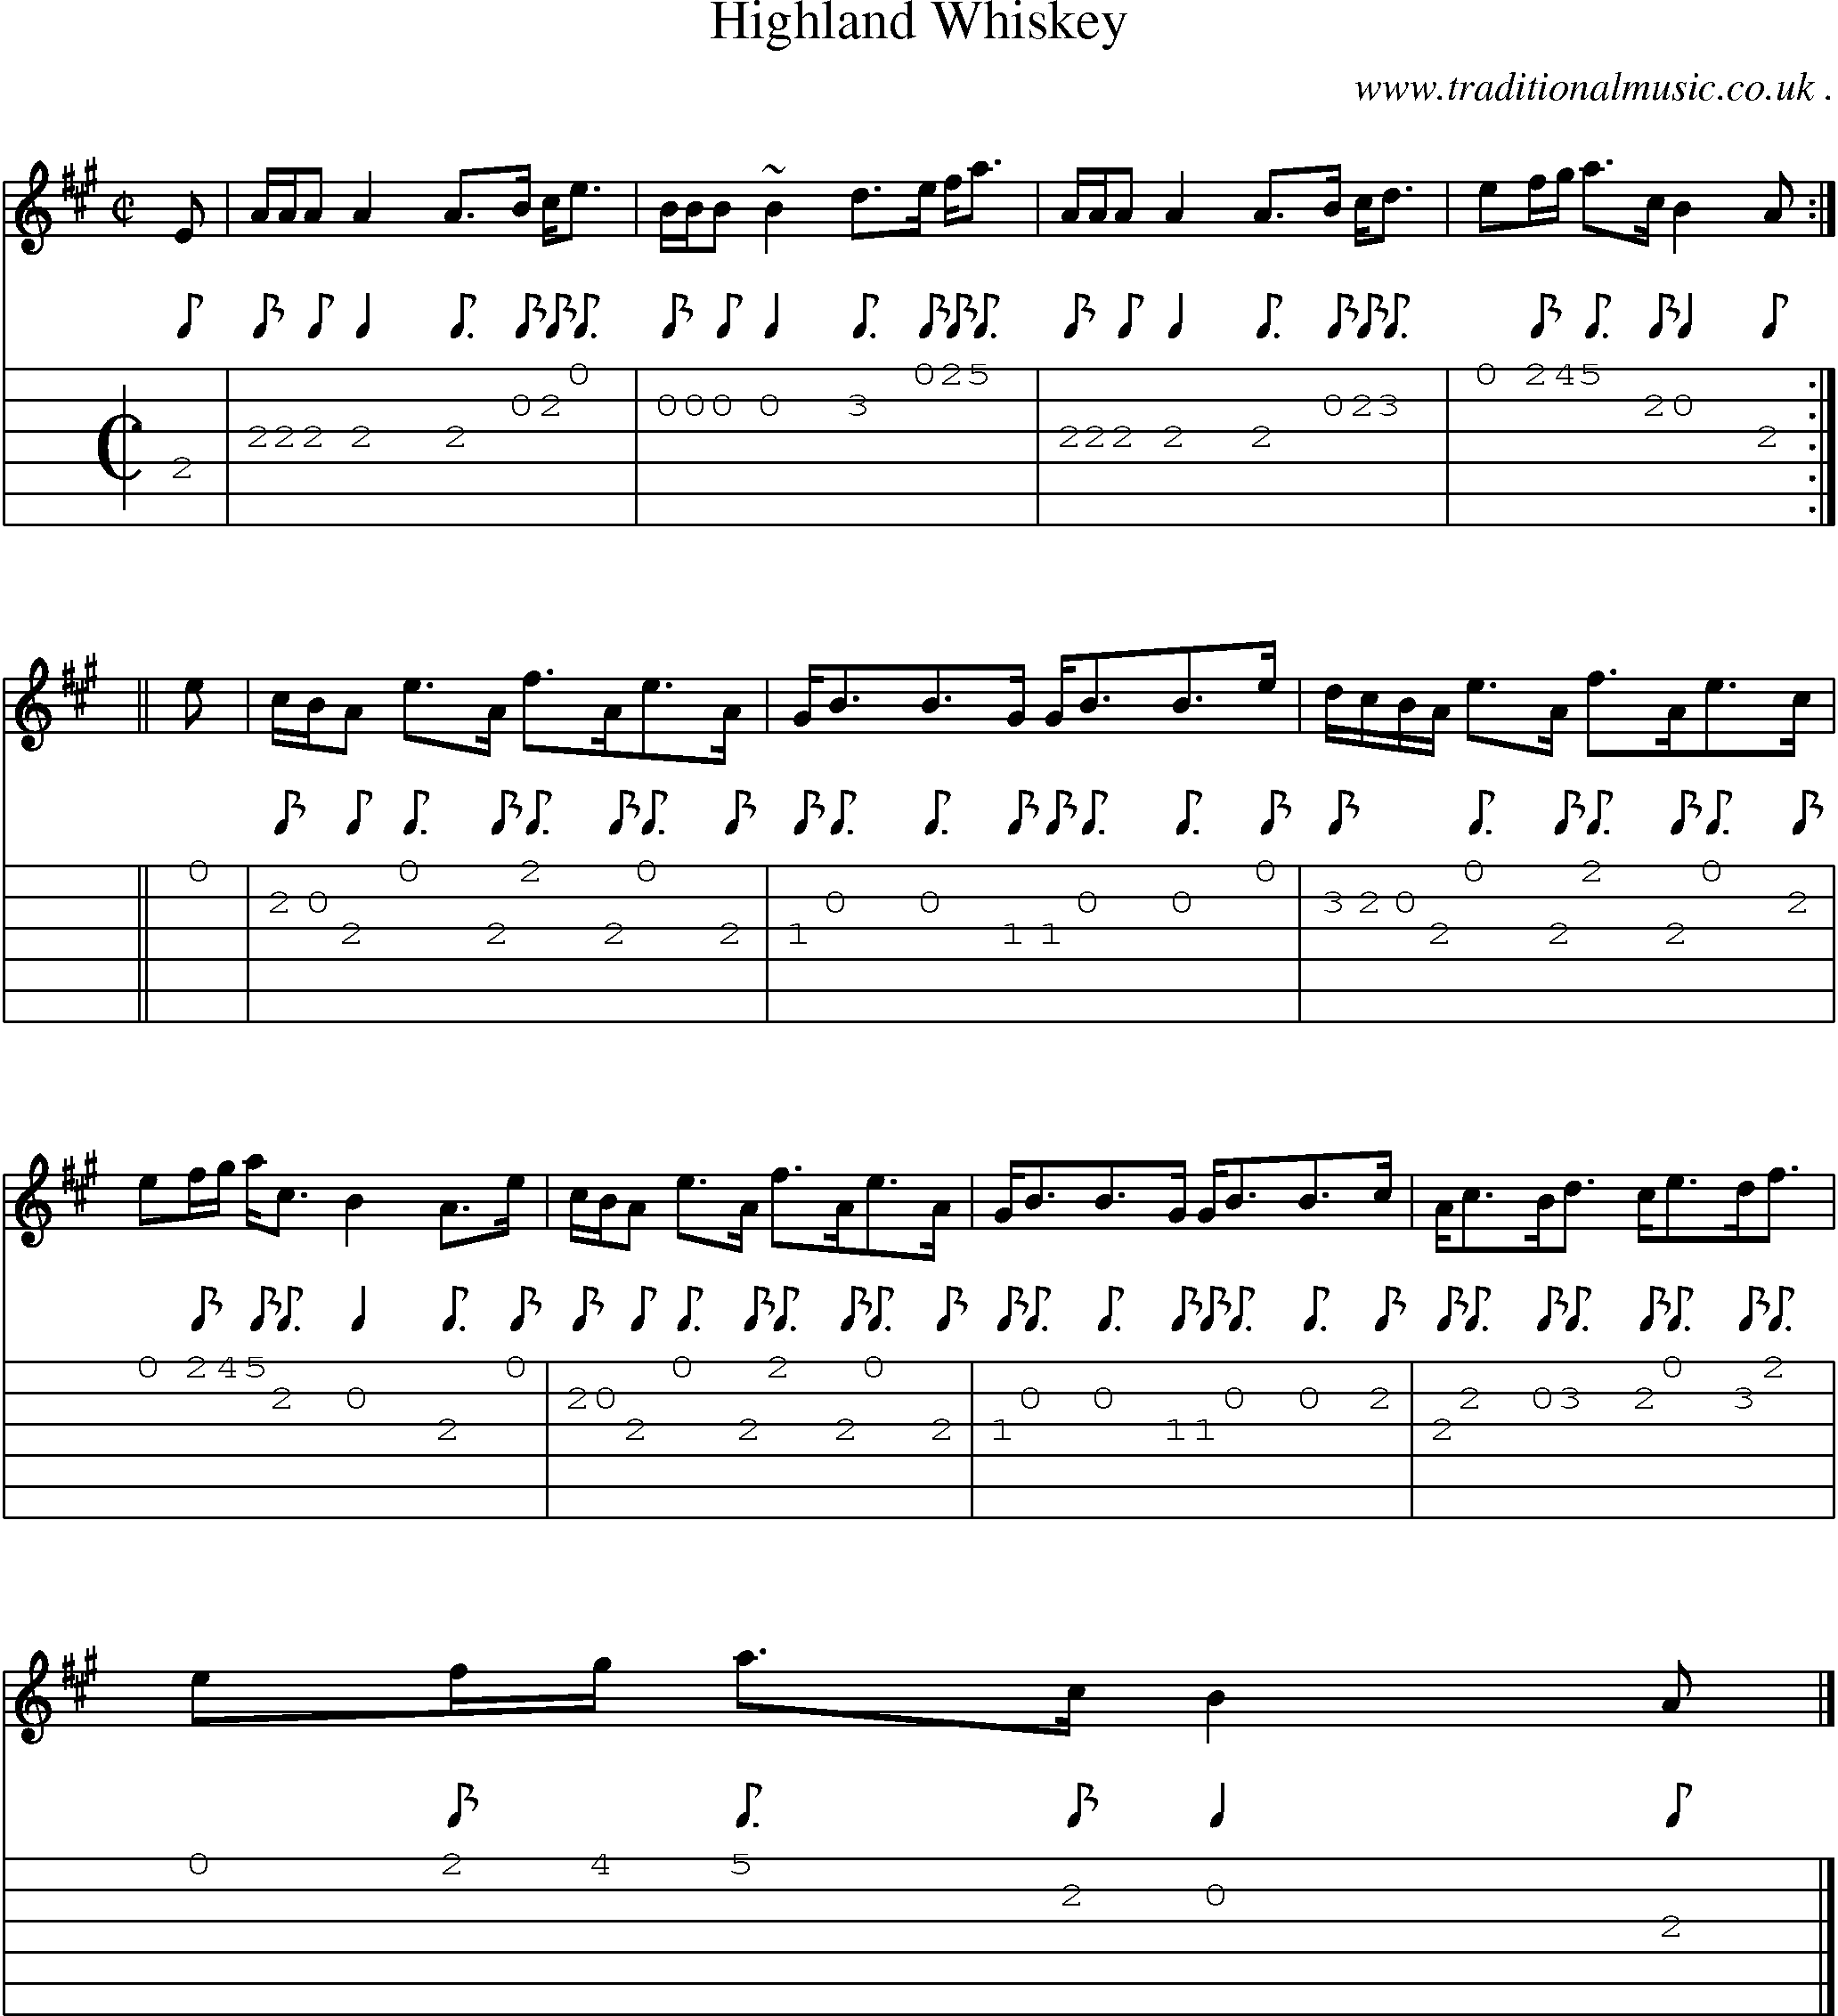 Sheet-music  score, Chords and Guitar Tabs for Highland Whiskey